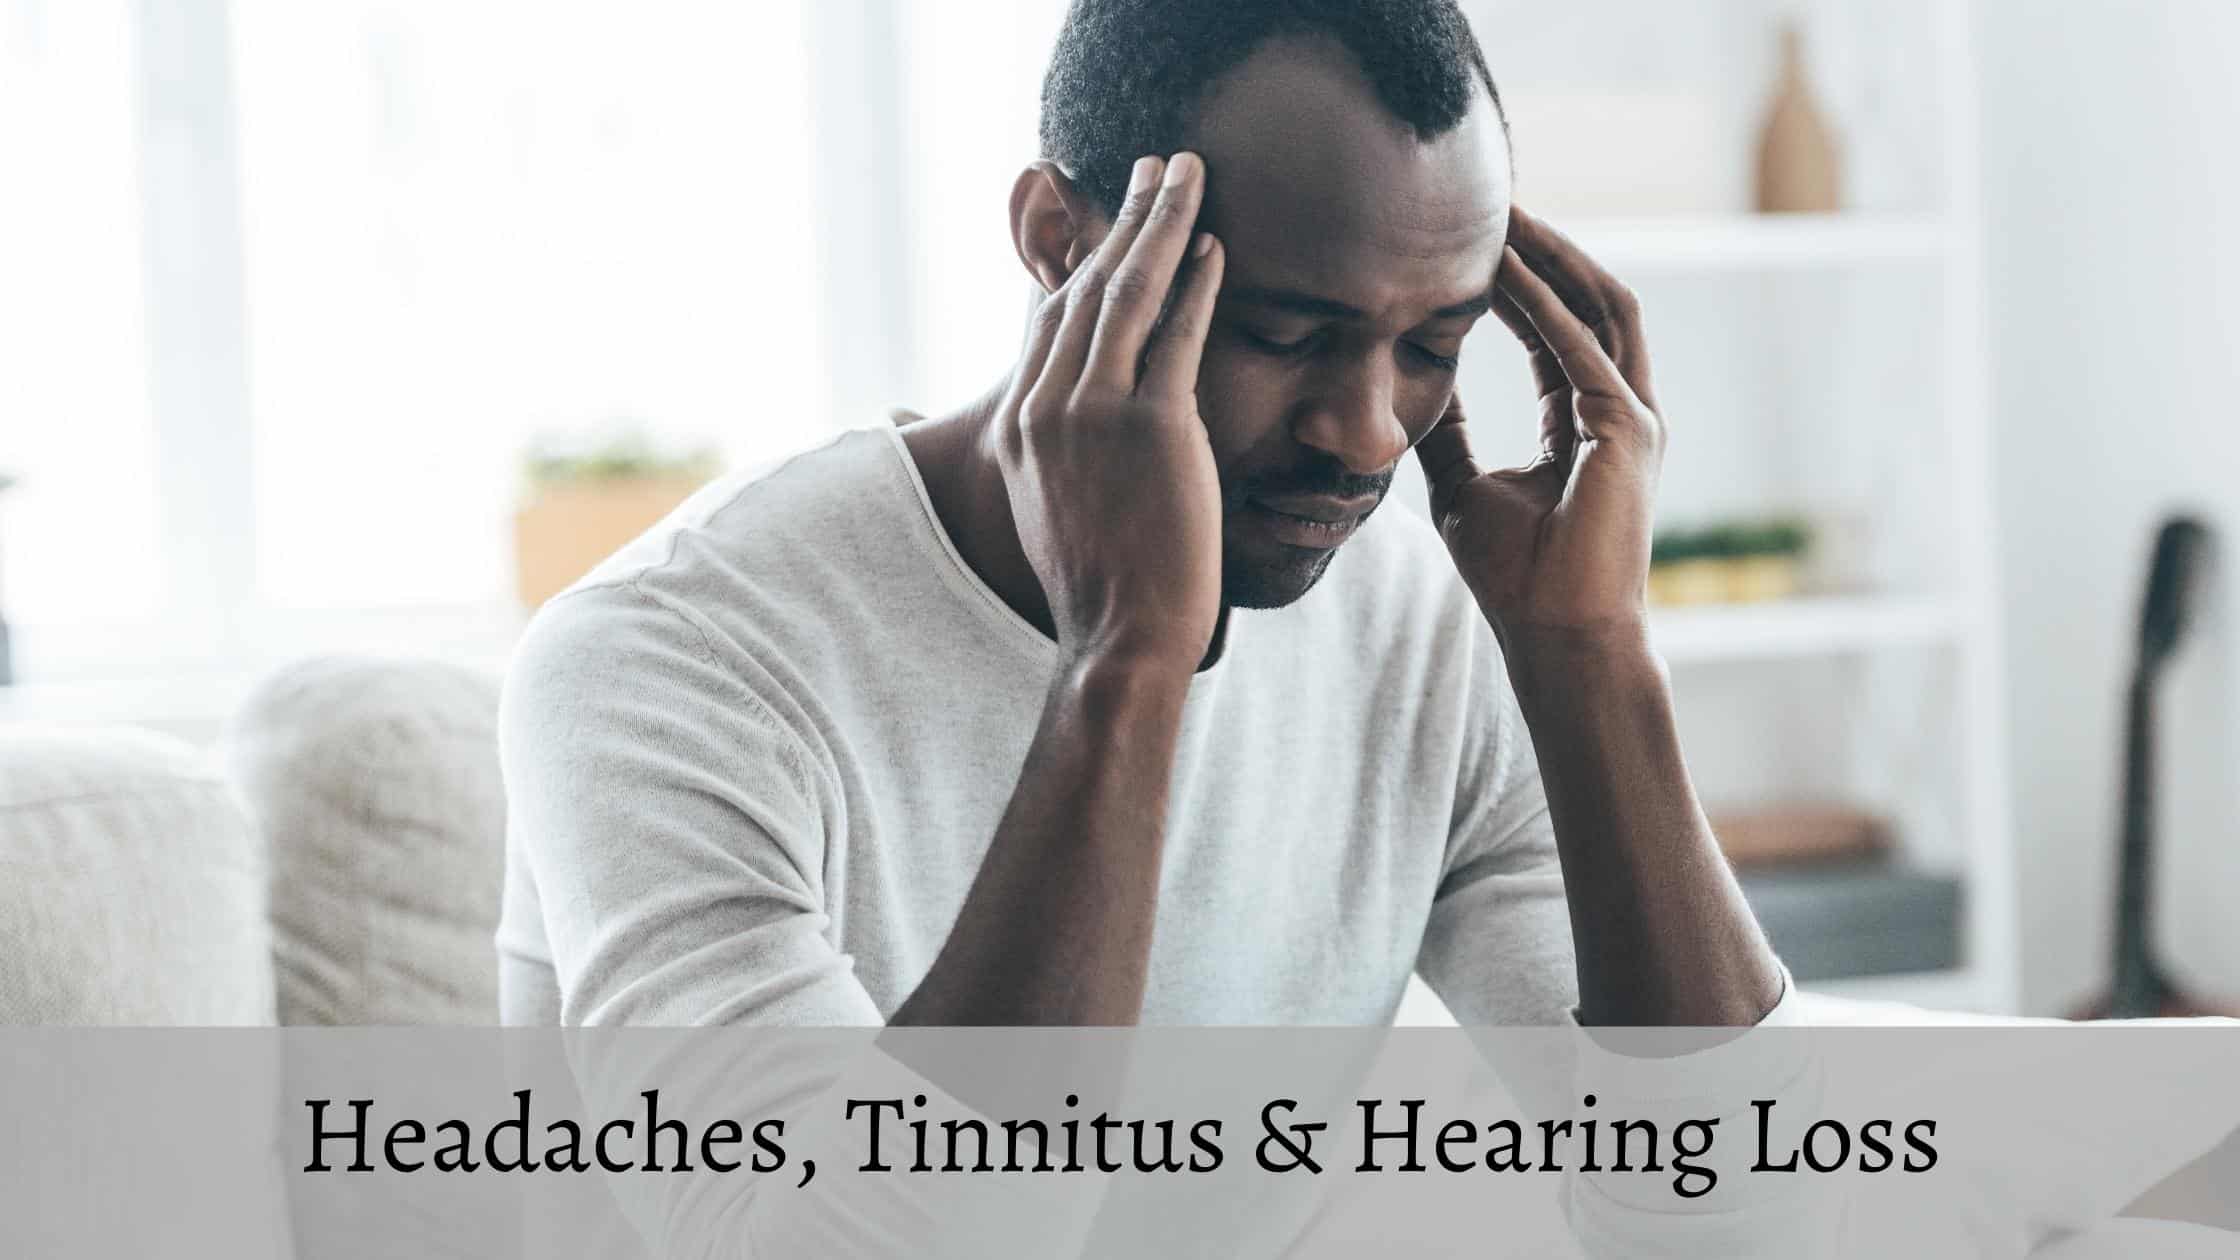 Featured image for “Headaches, Tinnitus & Hearing Loss”